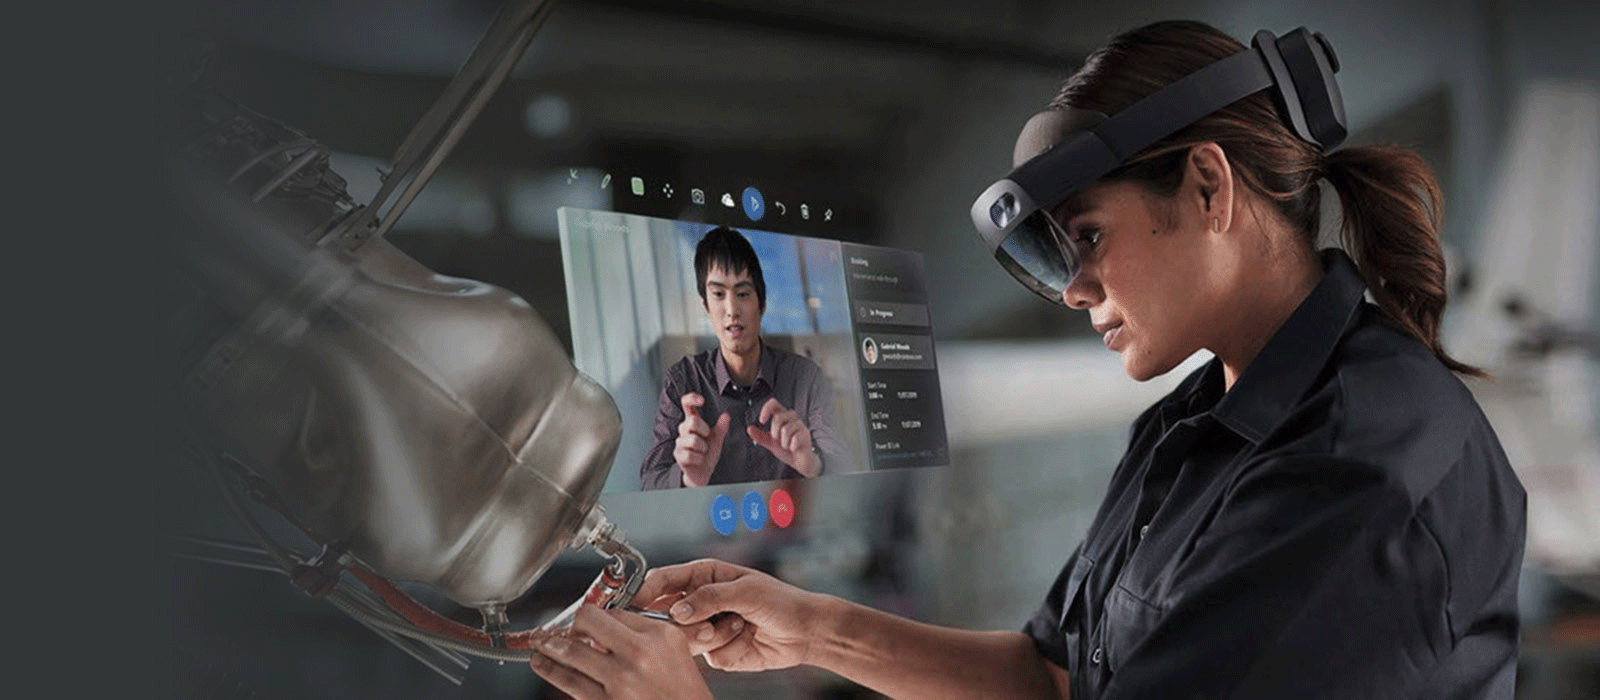 A woman is wearing the HoloLens 2 on her head and looks down